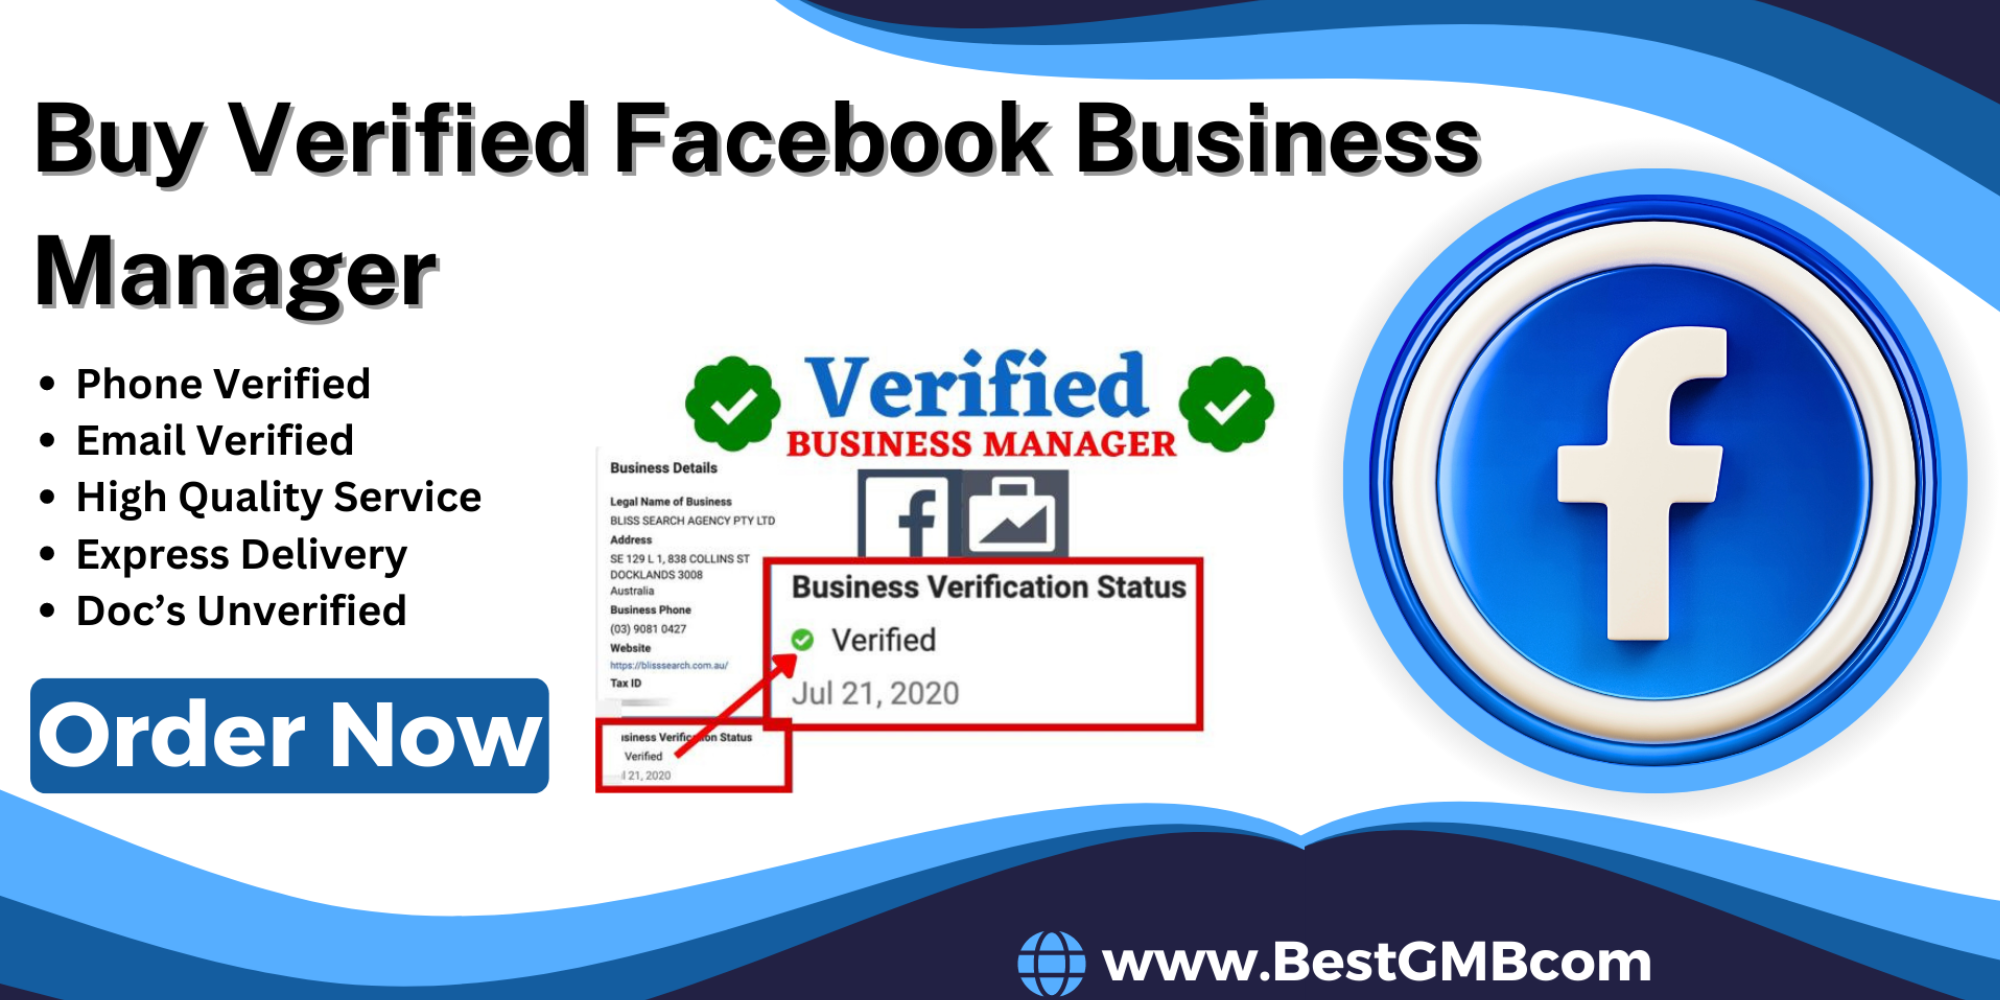 Buy Verified Facebook Business Manager